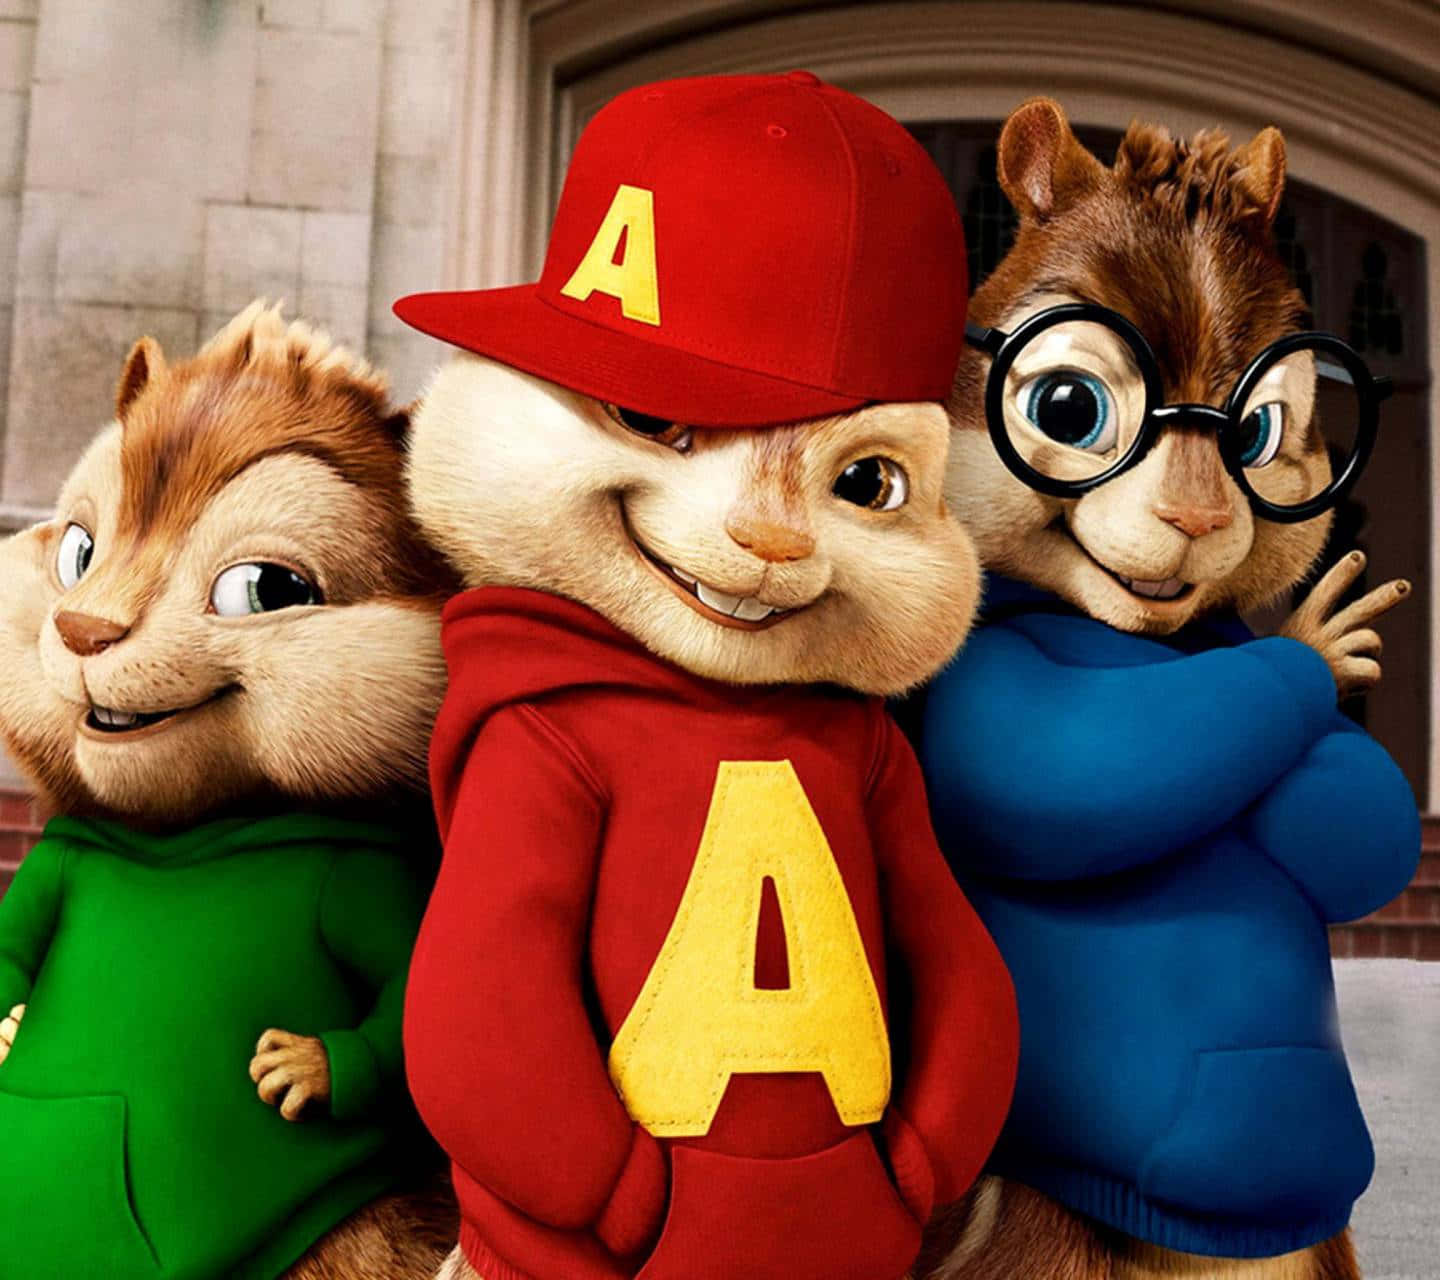 Let's Sing Along with Alvin And The Chipmunks!